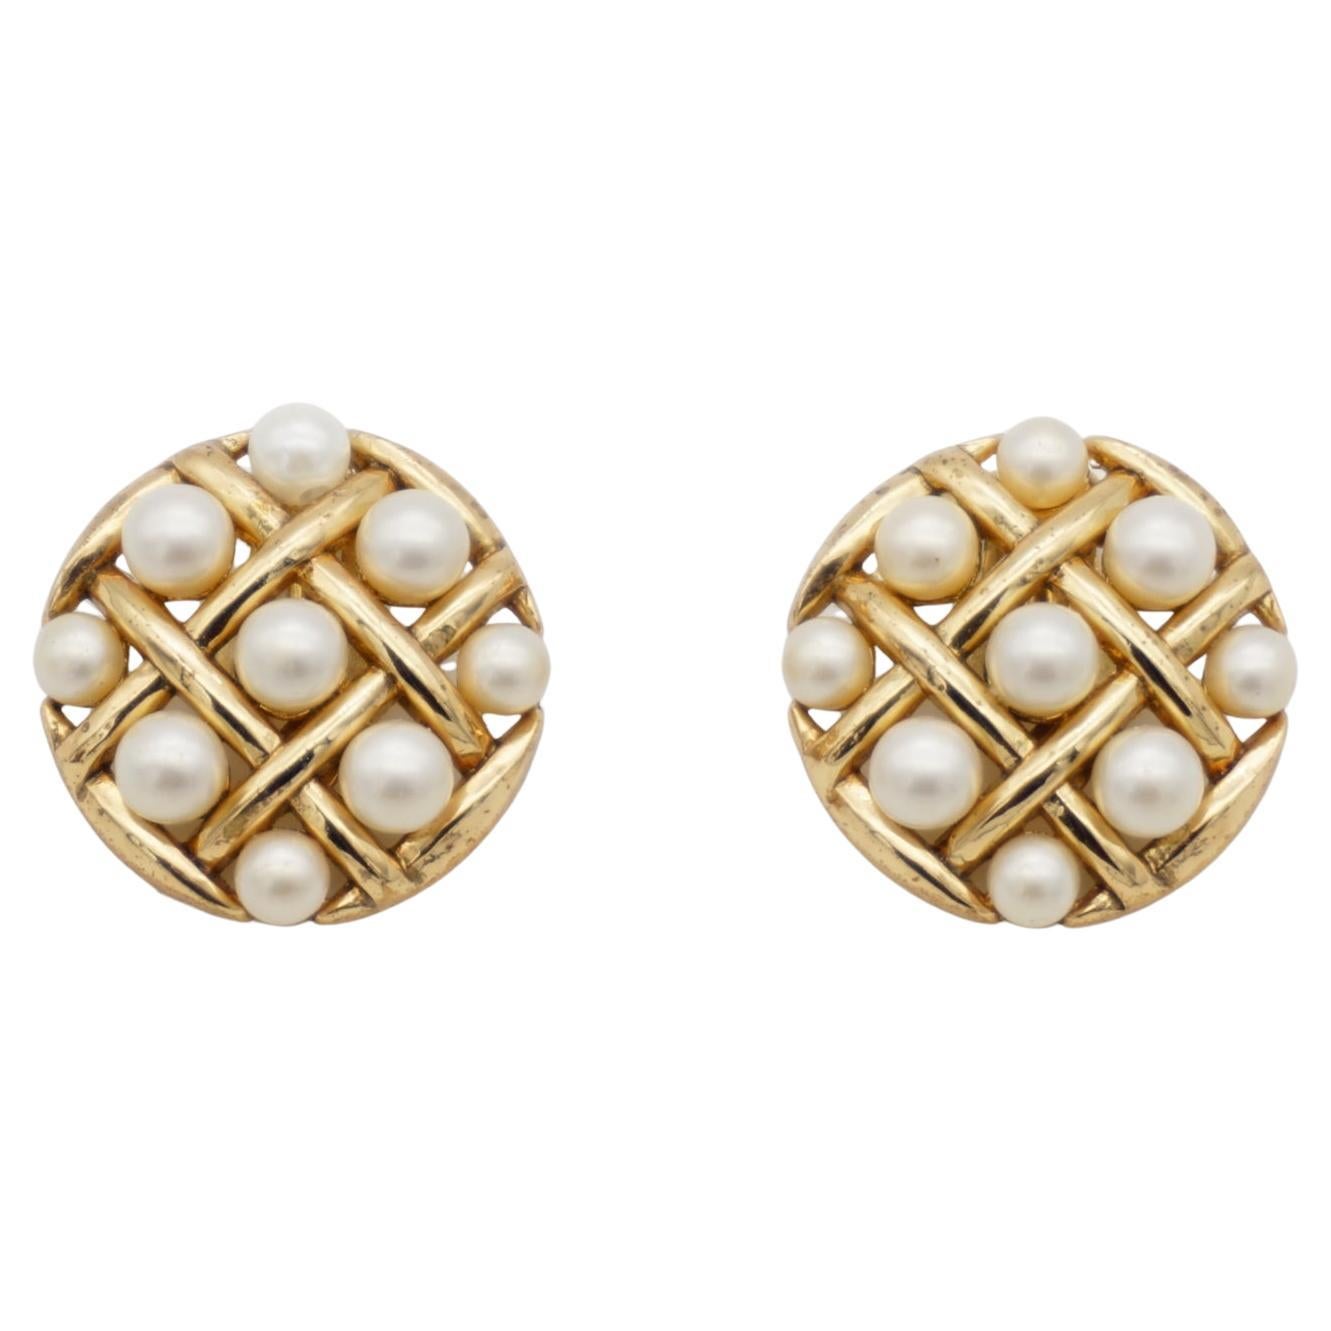 Alfred Philippe for Trifari Clip-on Earrings